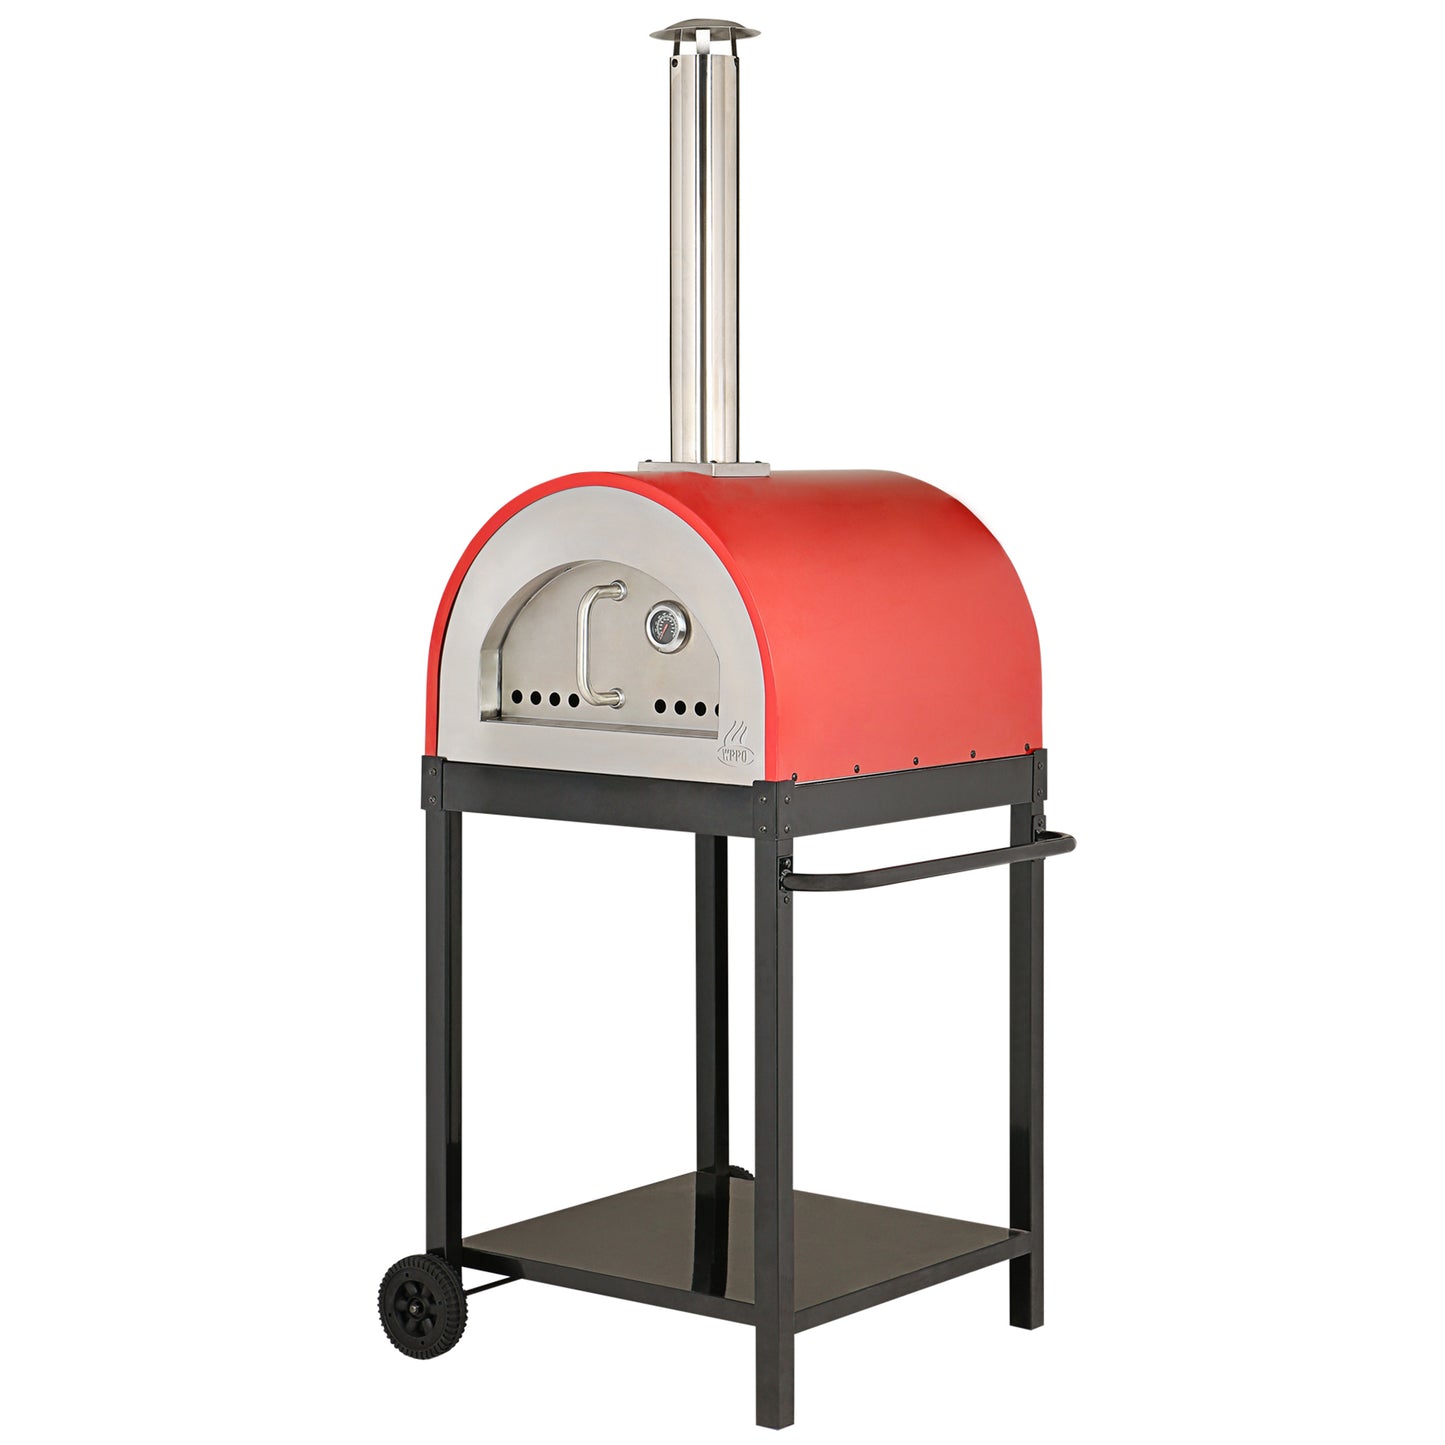 SUPER SALE! 50% OFF! Gas-Ready Traditional 25" Pizza Oven